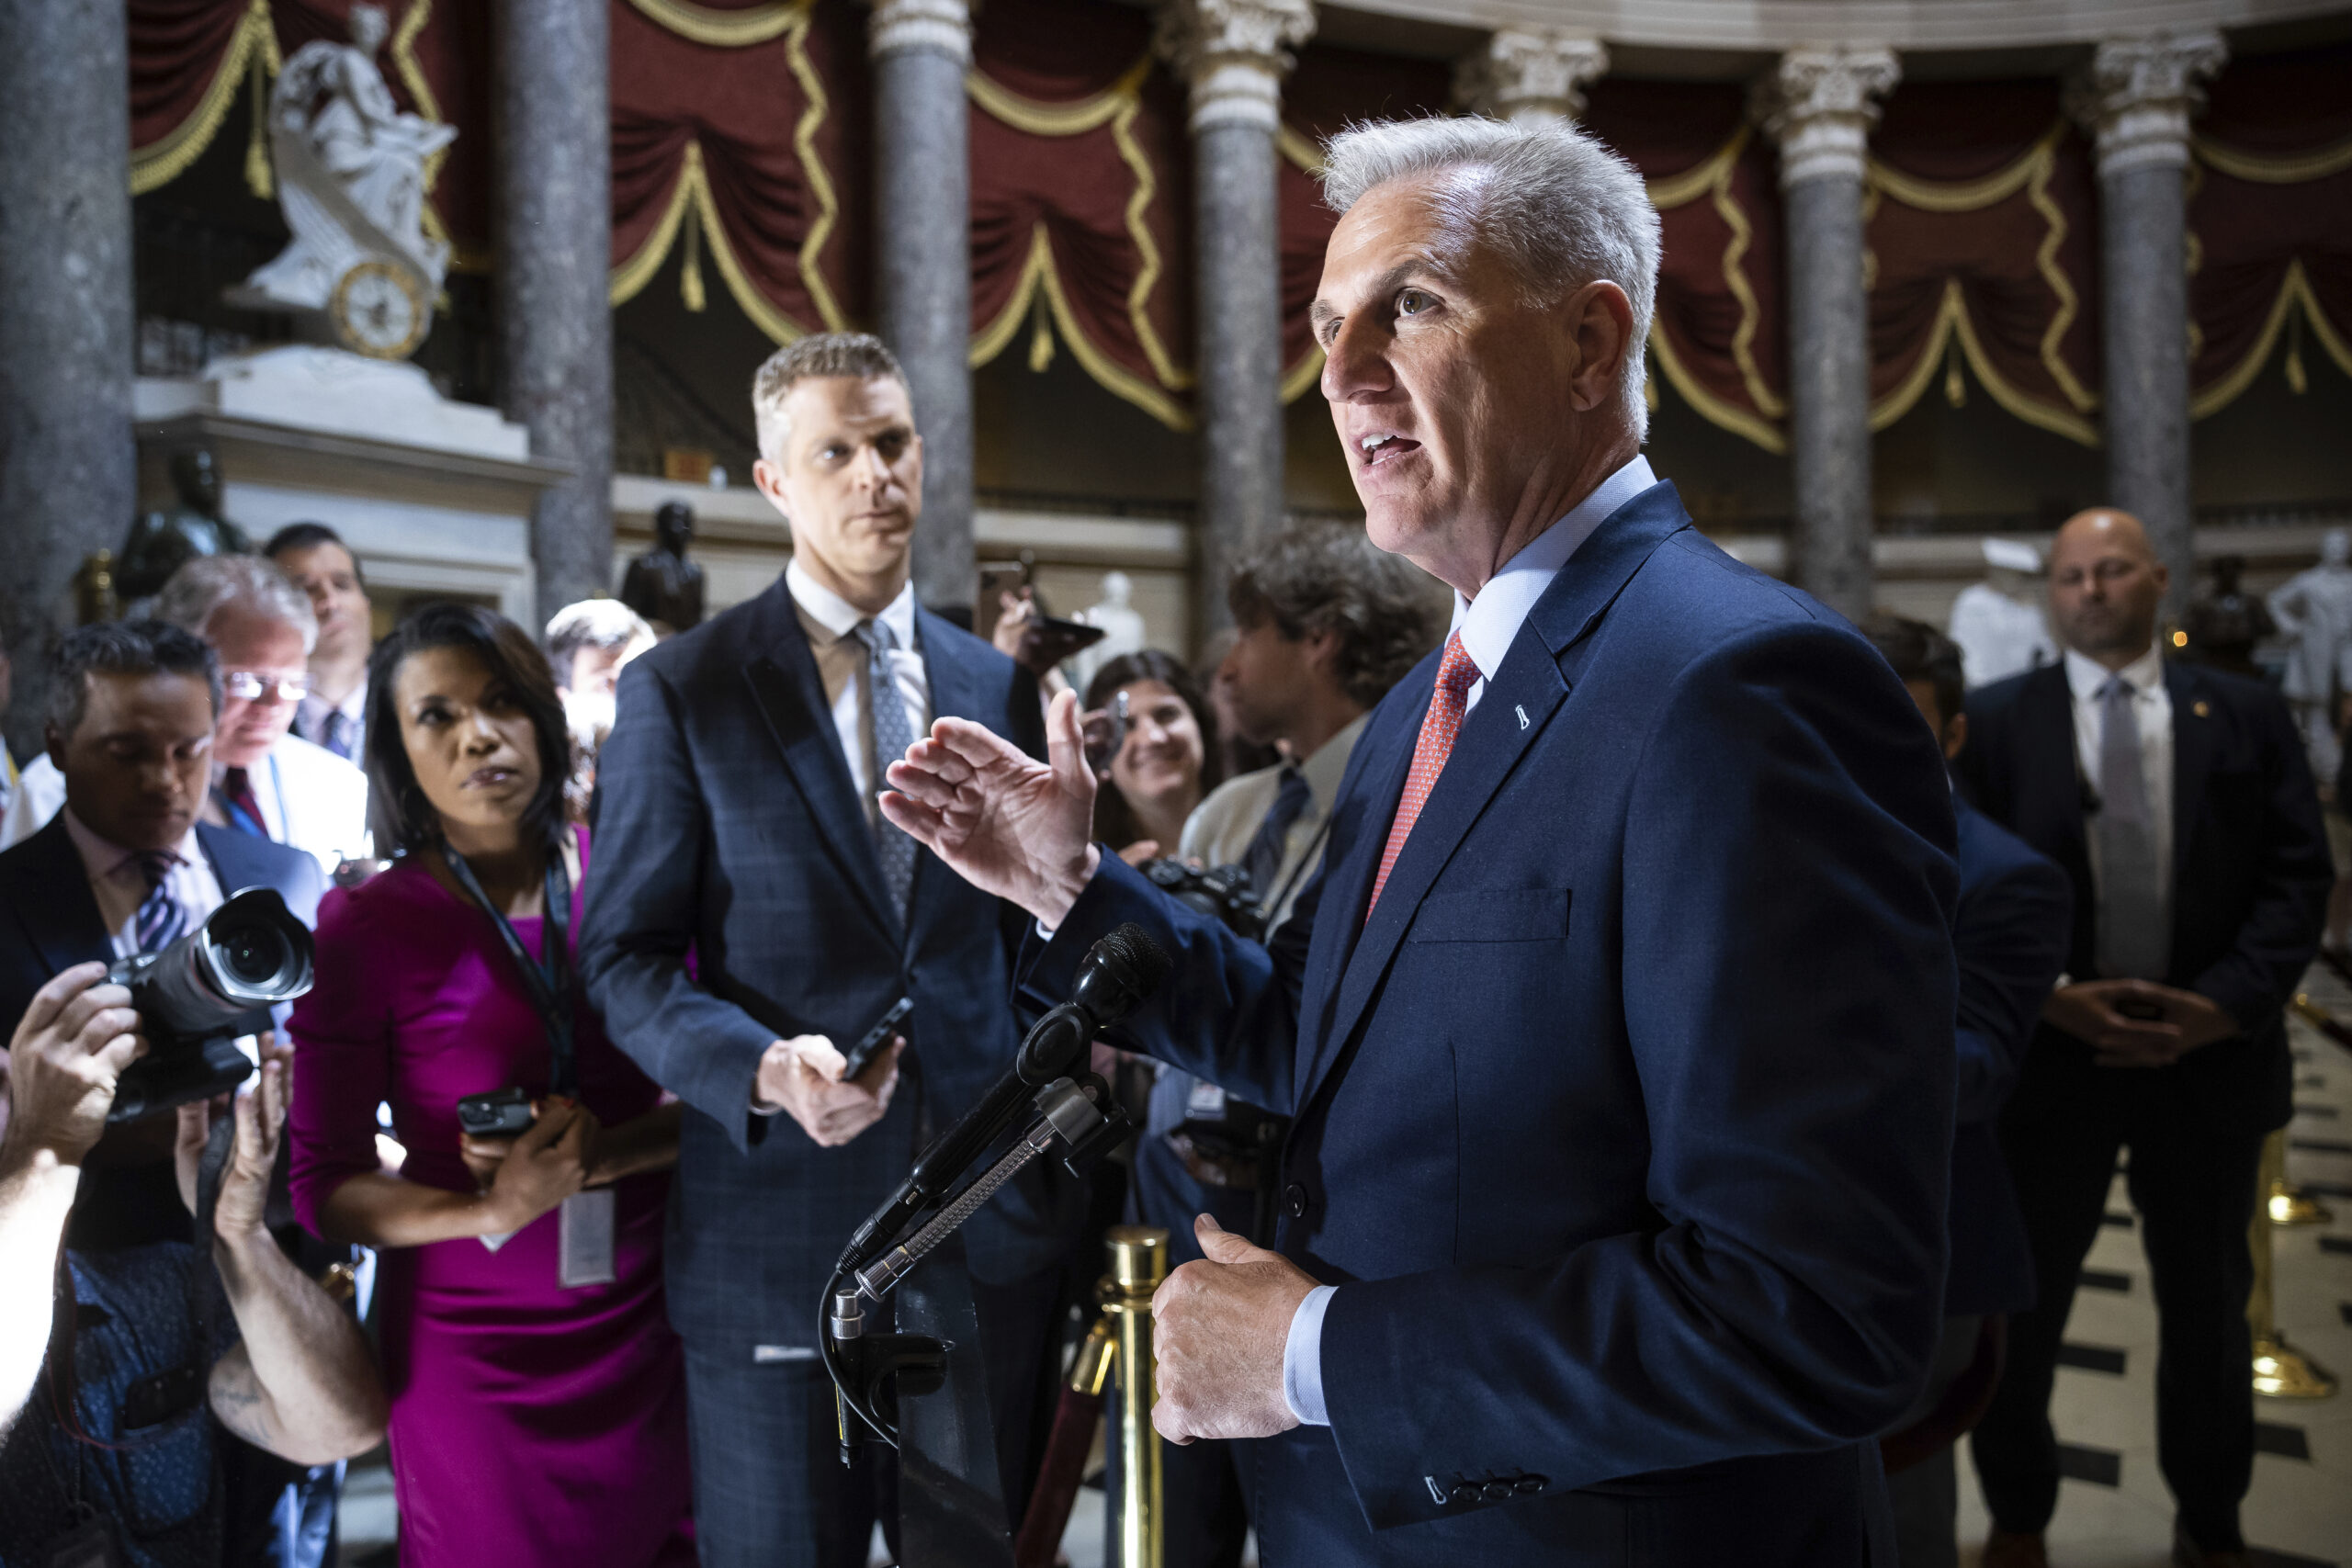 McCarthy’s office has not met with Chamber during debt ceiling fight